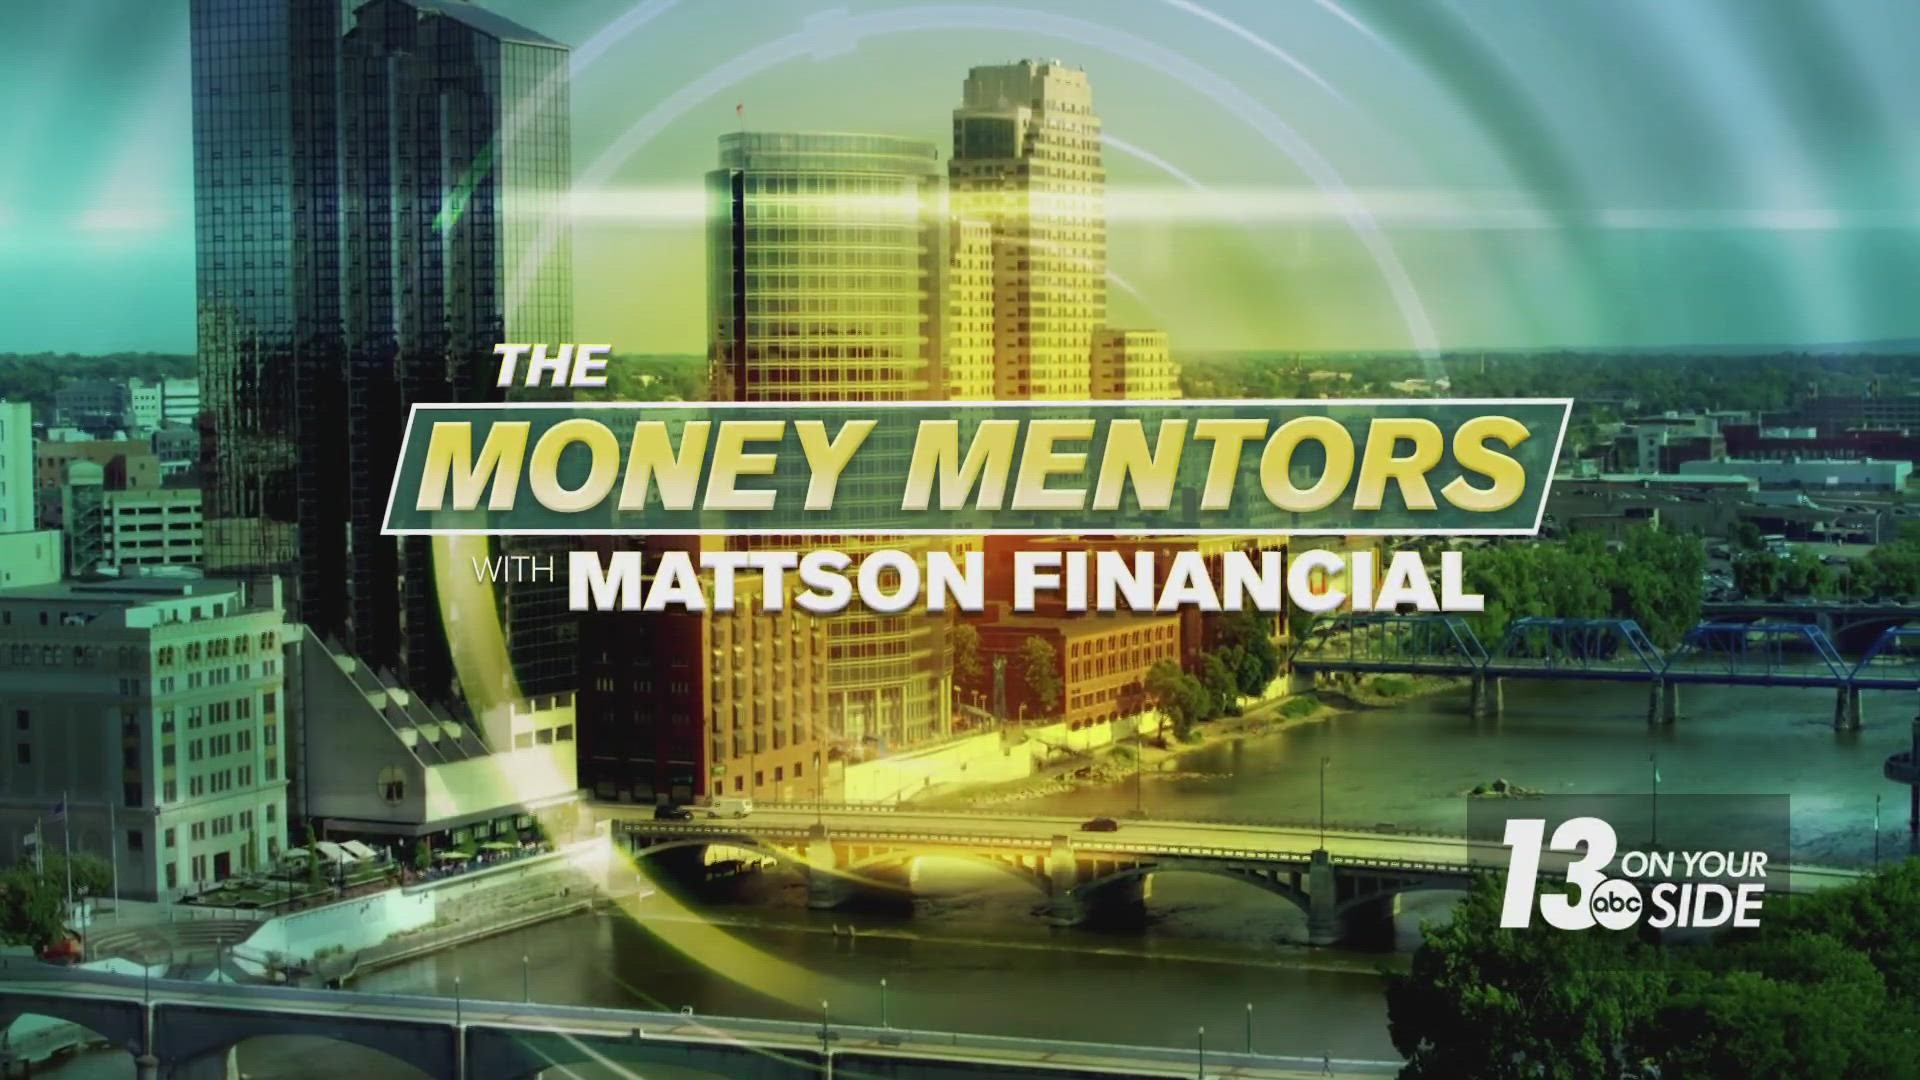 The Mattson Financial Services firm has been helping people retire successfully for decades.